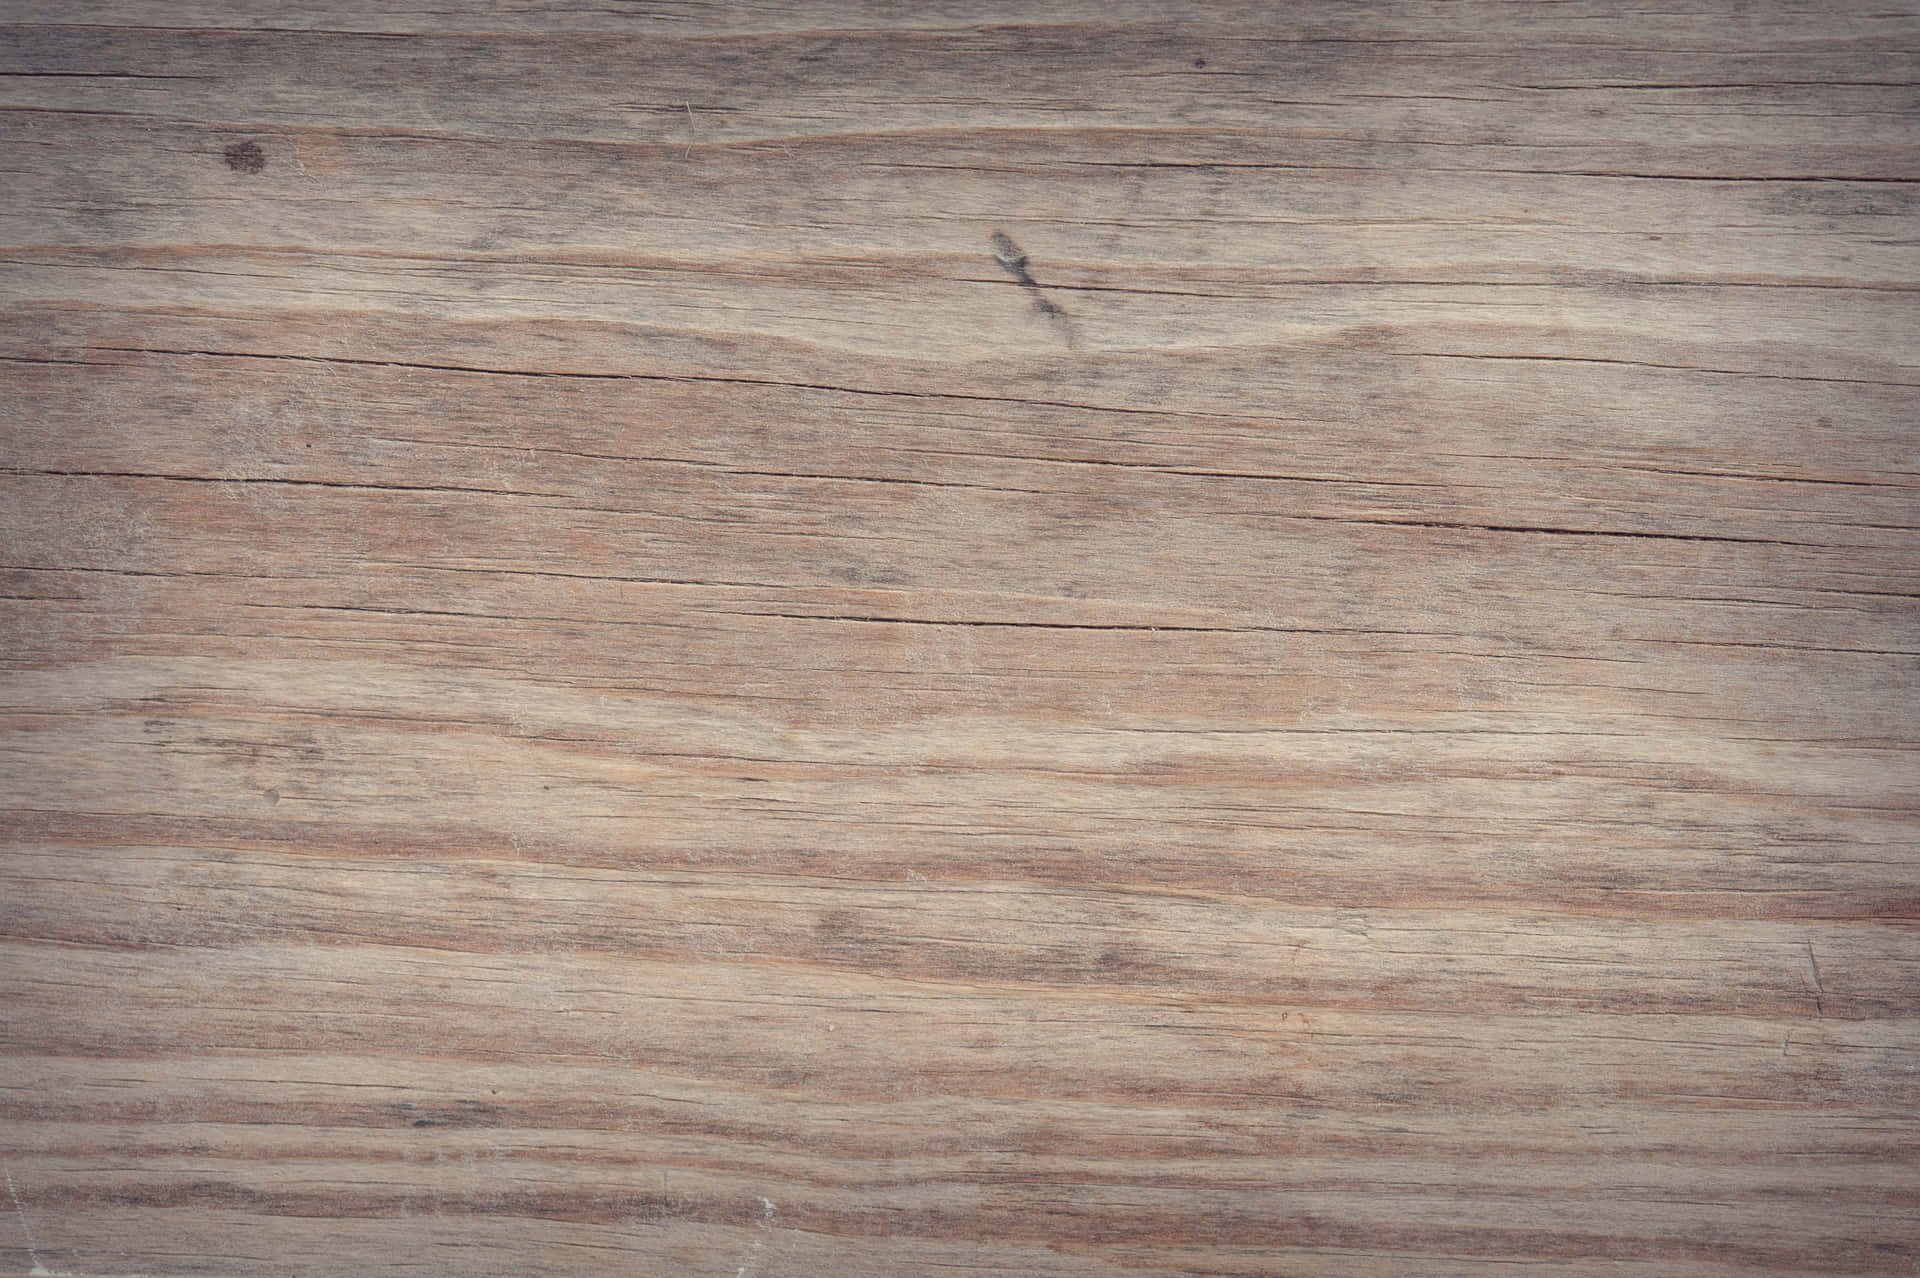 A Close Up Of A Wooden Surface